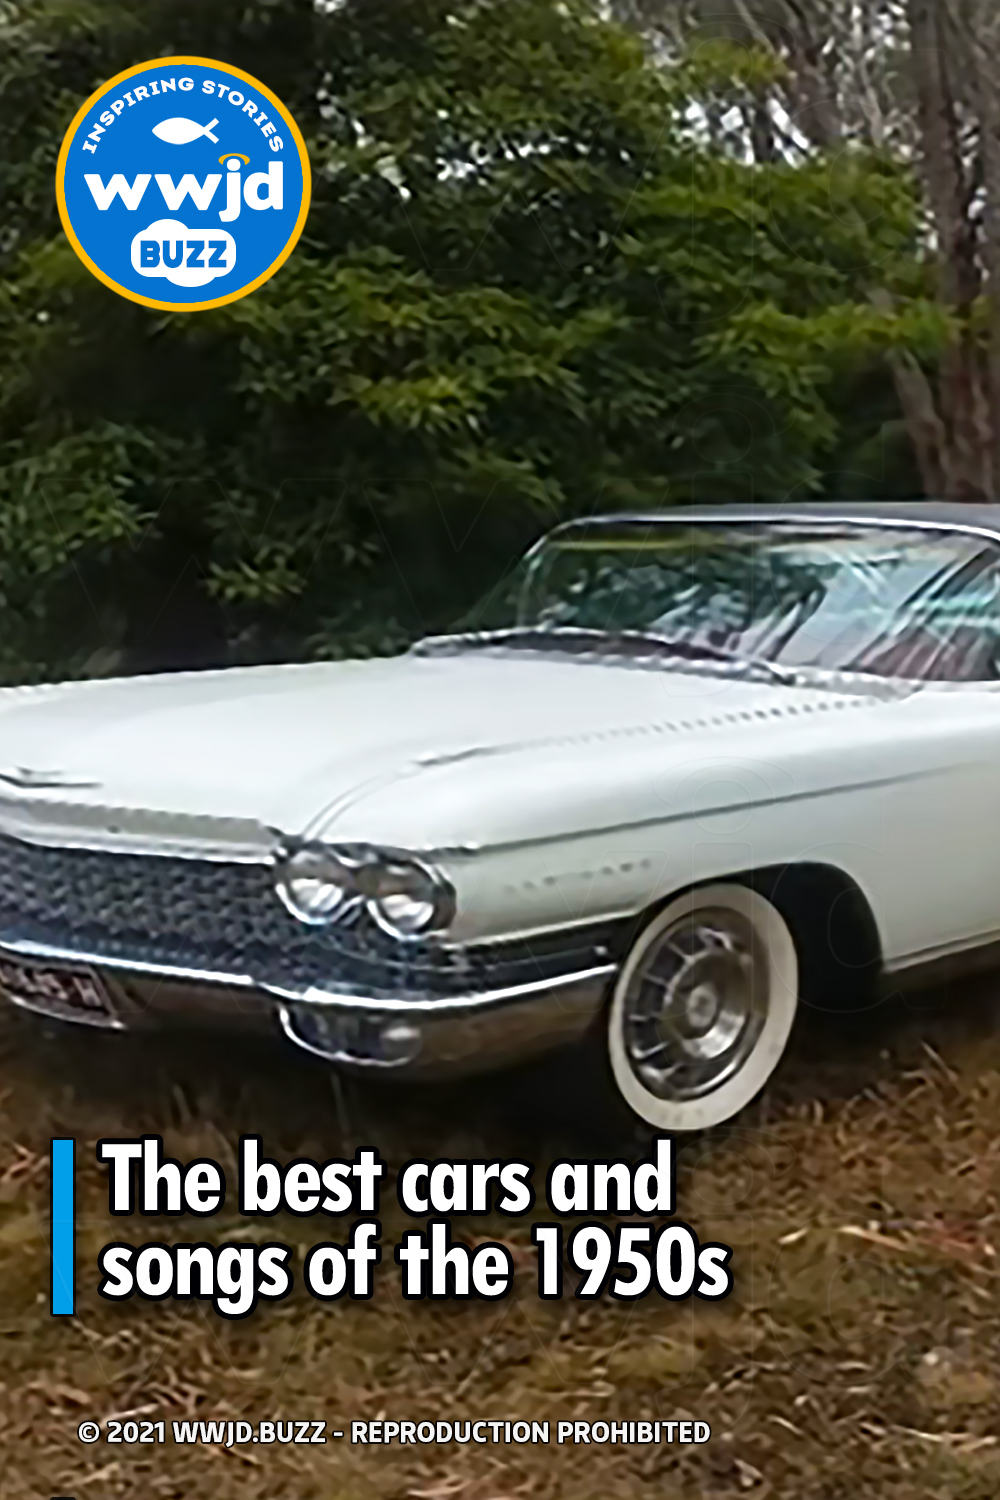 The best cars and songs of the 1950s